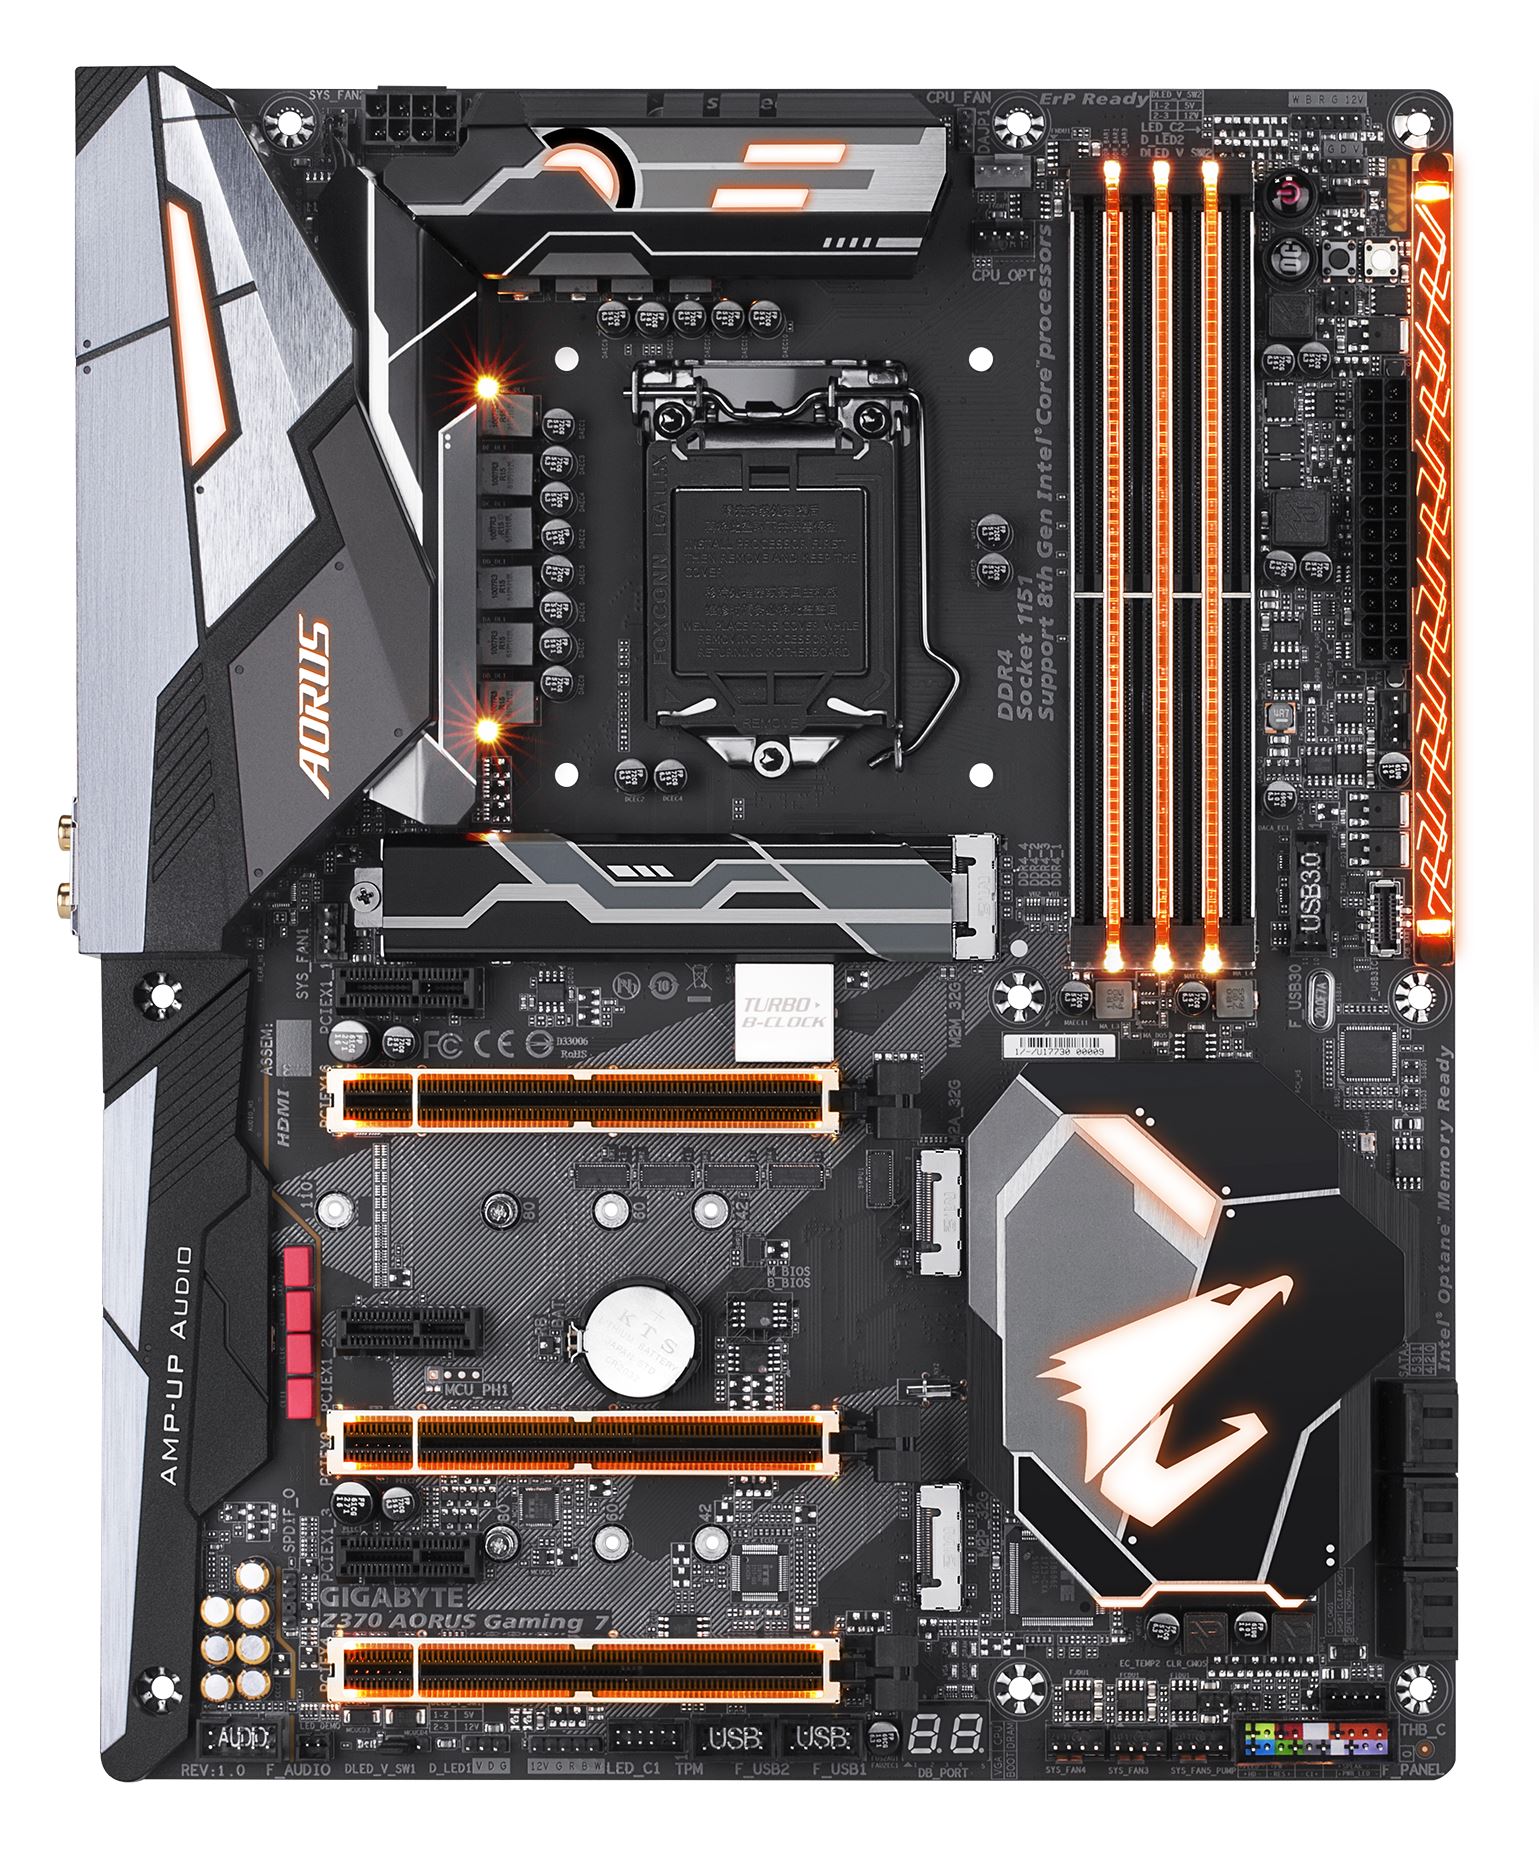 GIGABYTE Z370 Gaming - Analyzing Z370 for Intel's 8th Generation A Quick Look at 50+ Motherboards